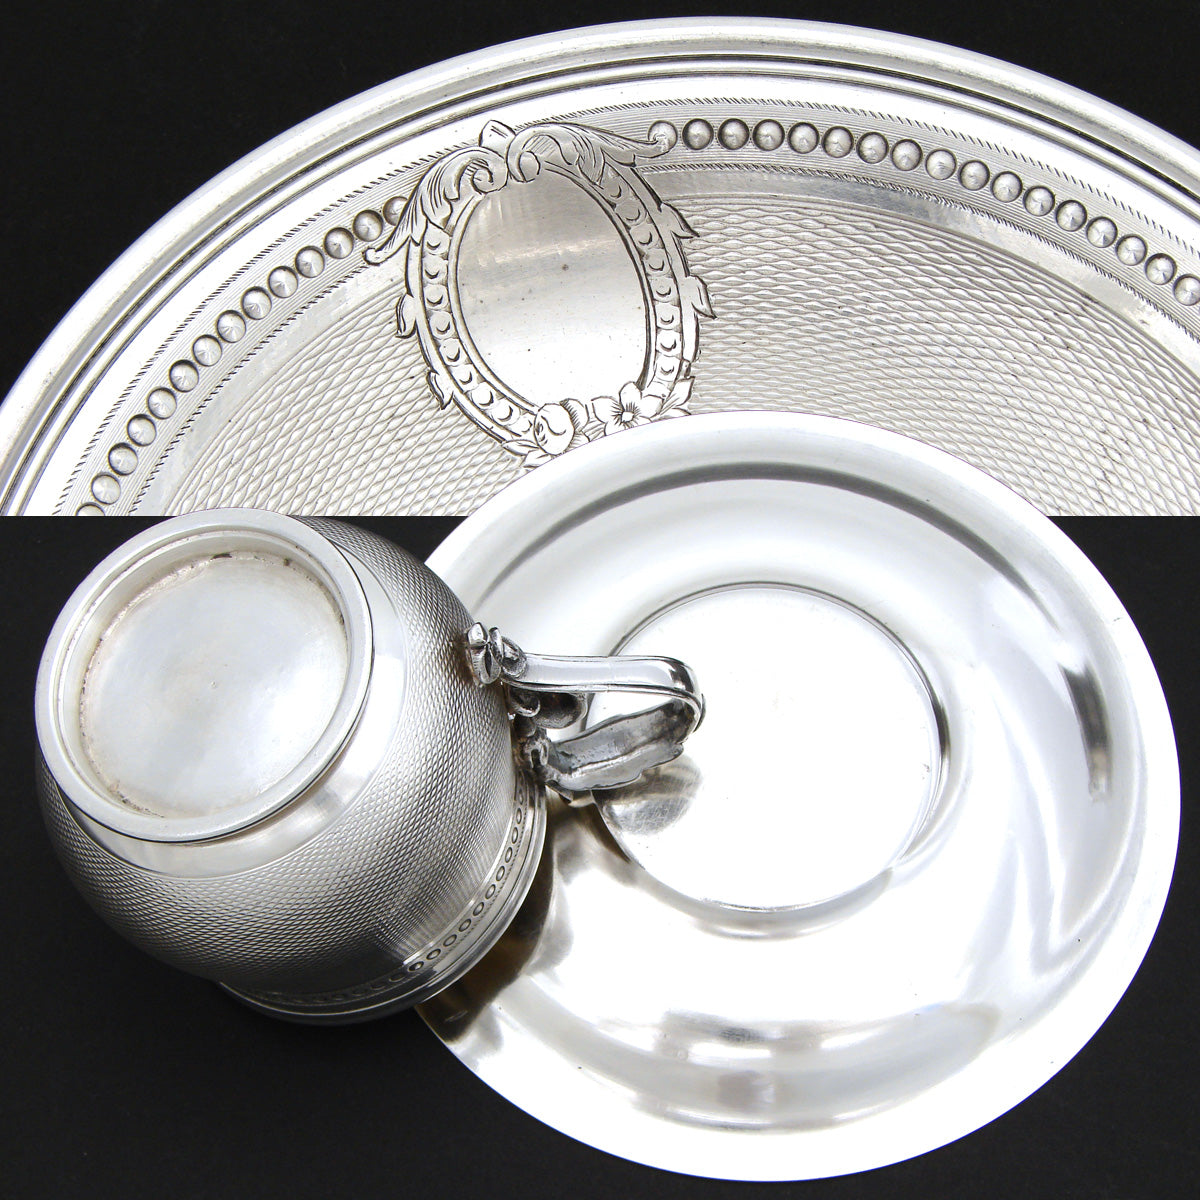 Lovely Antique French Silver Plate Coffee or Tea Cup & Saucer, Ornate Guilloche Style